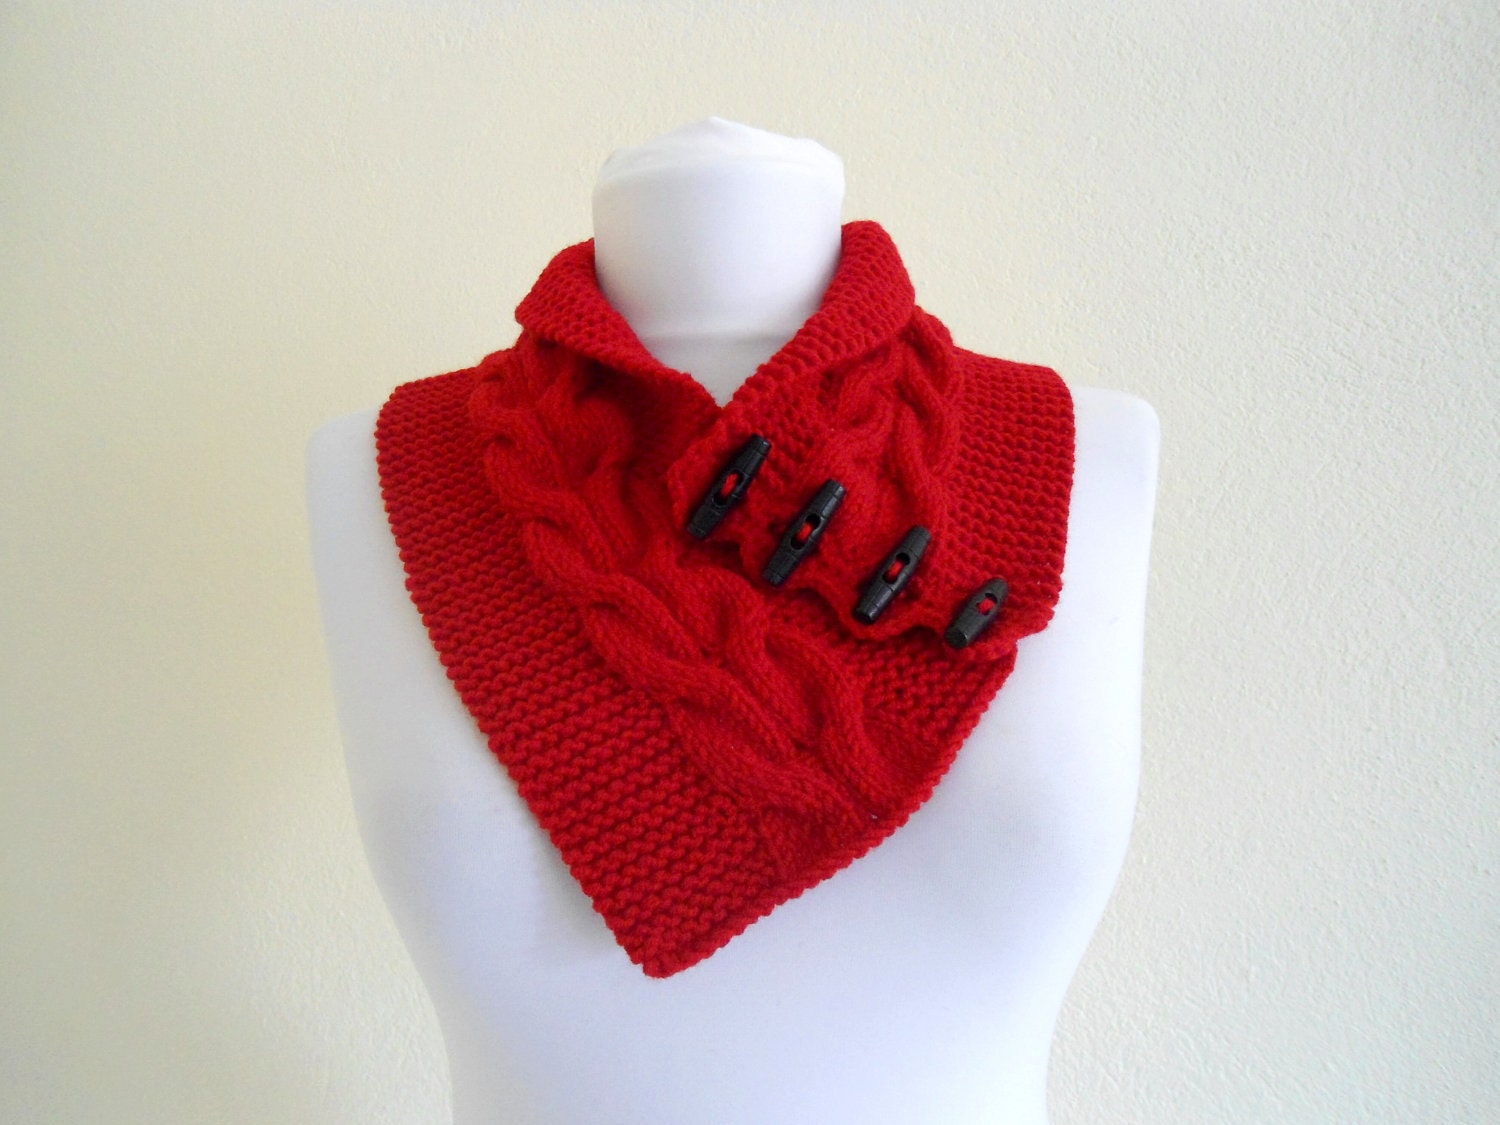 unisex, Red neckwarmers, wool, hand-knitted,fashion,gift, valentine, valentines day, winter trends, fashion, 2012